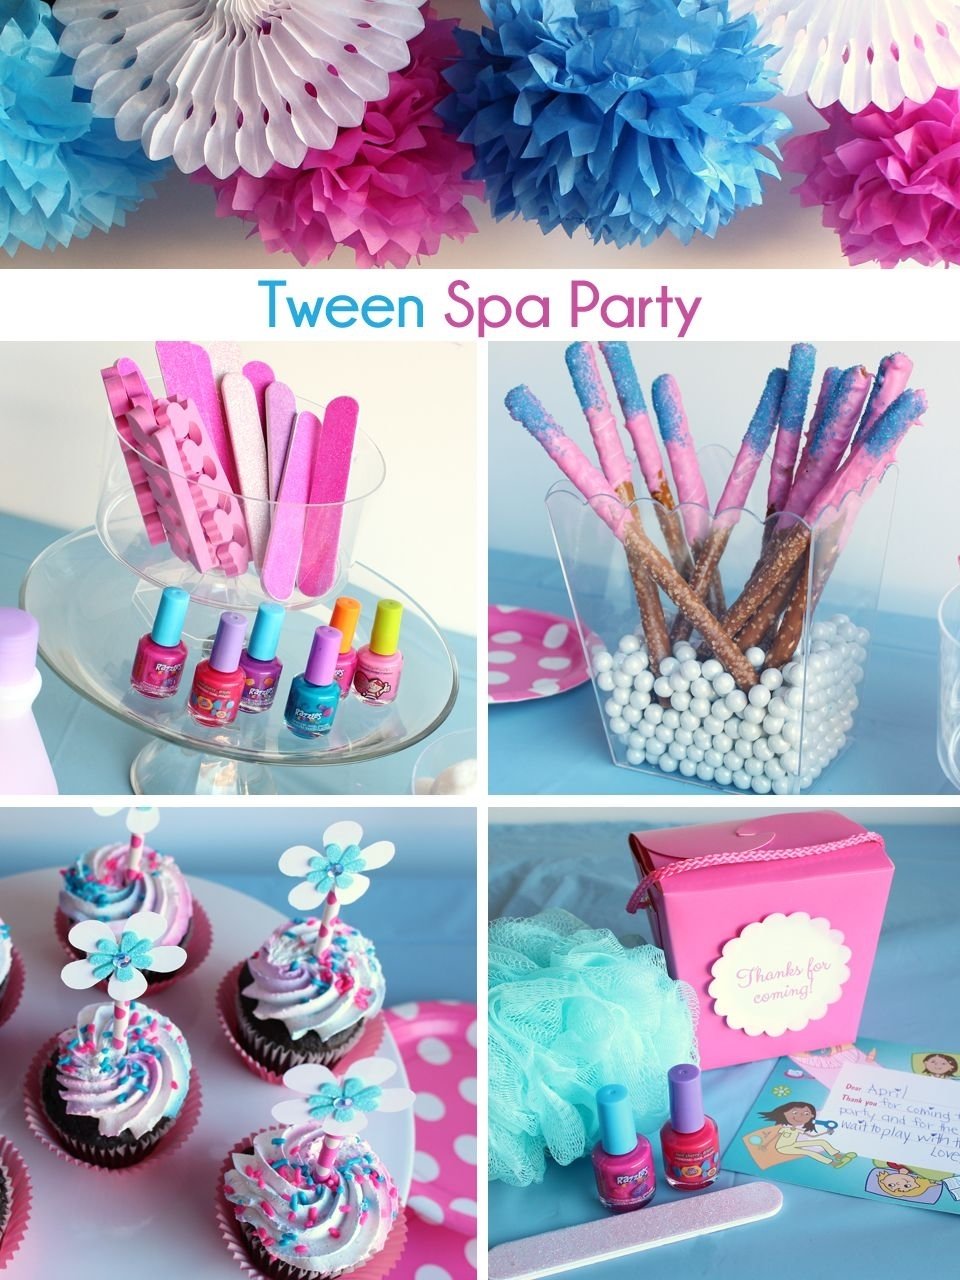 10 Most Popular Spa Party Ideas For Tweens tween spa party ideas decor activities and sweets to serve 2022